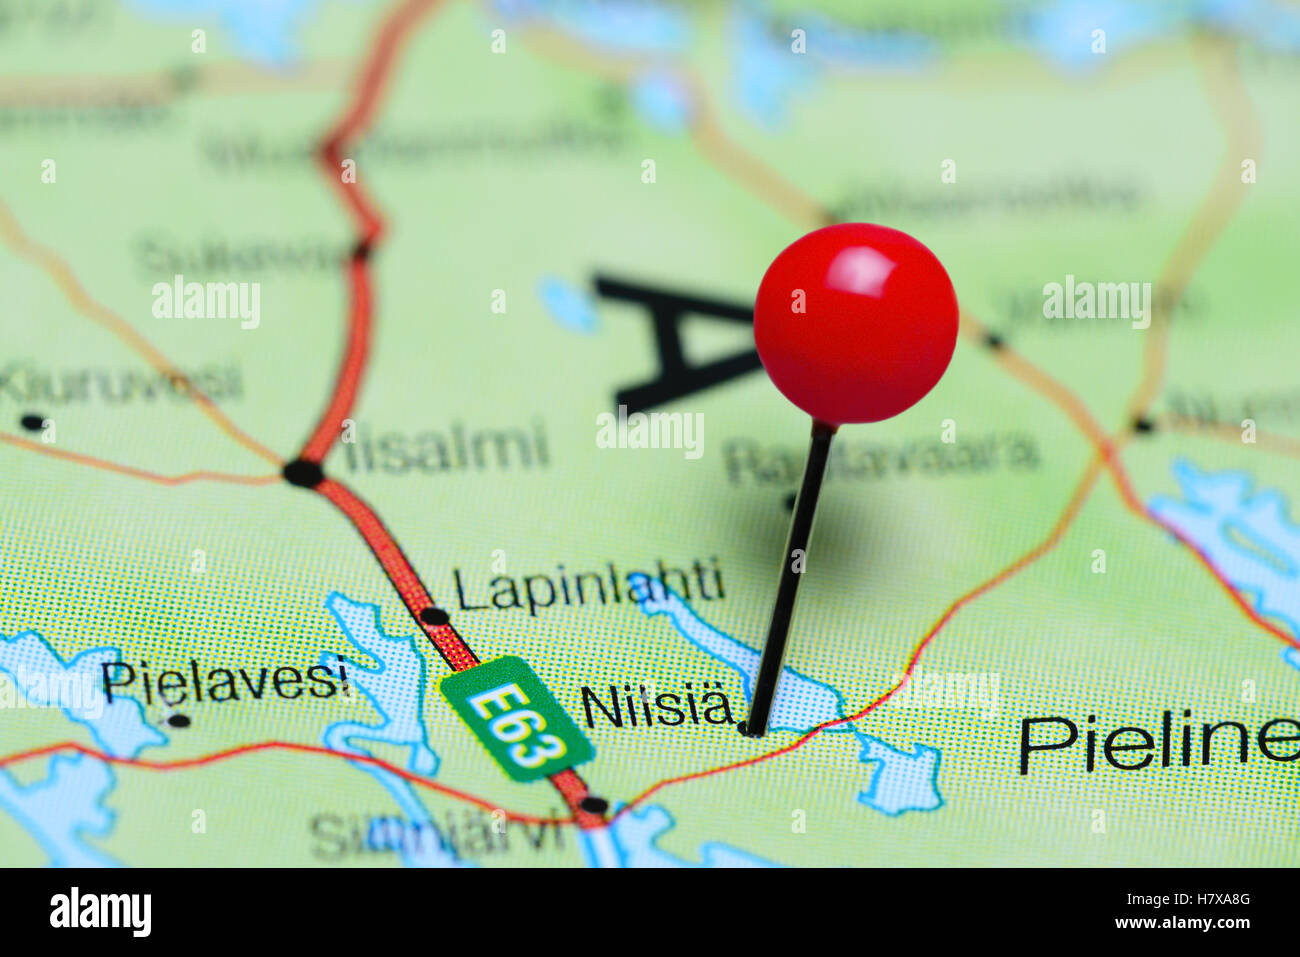 Nilsia pinned on a map of Finland Stock Photo